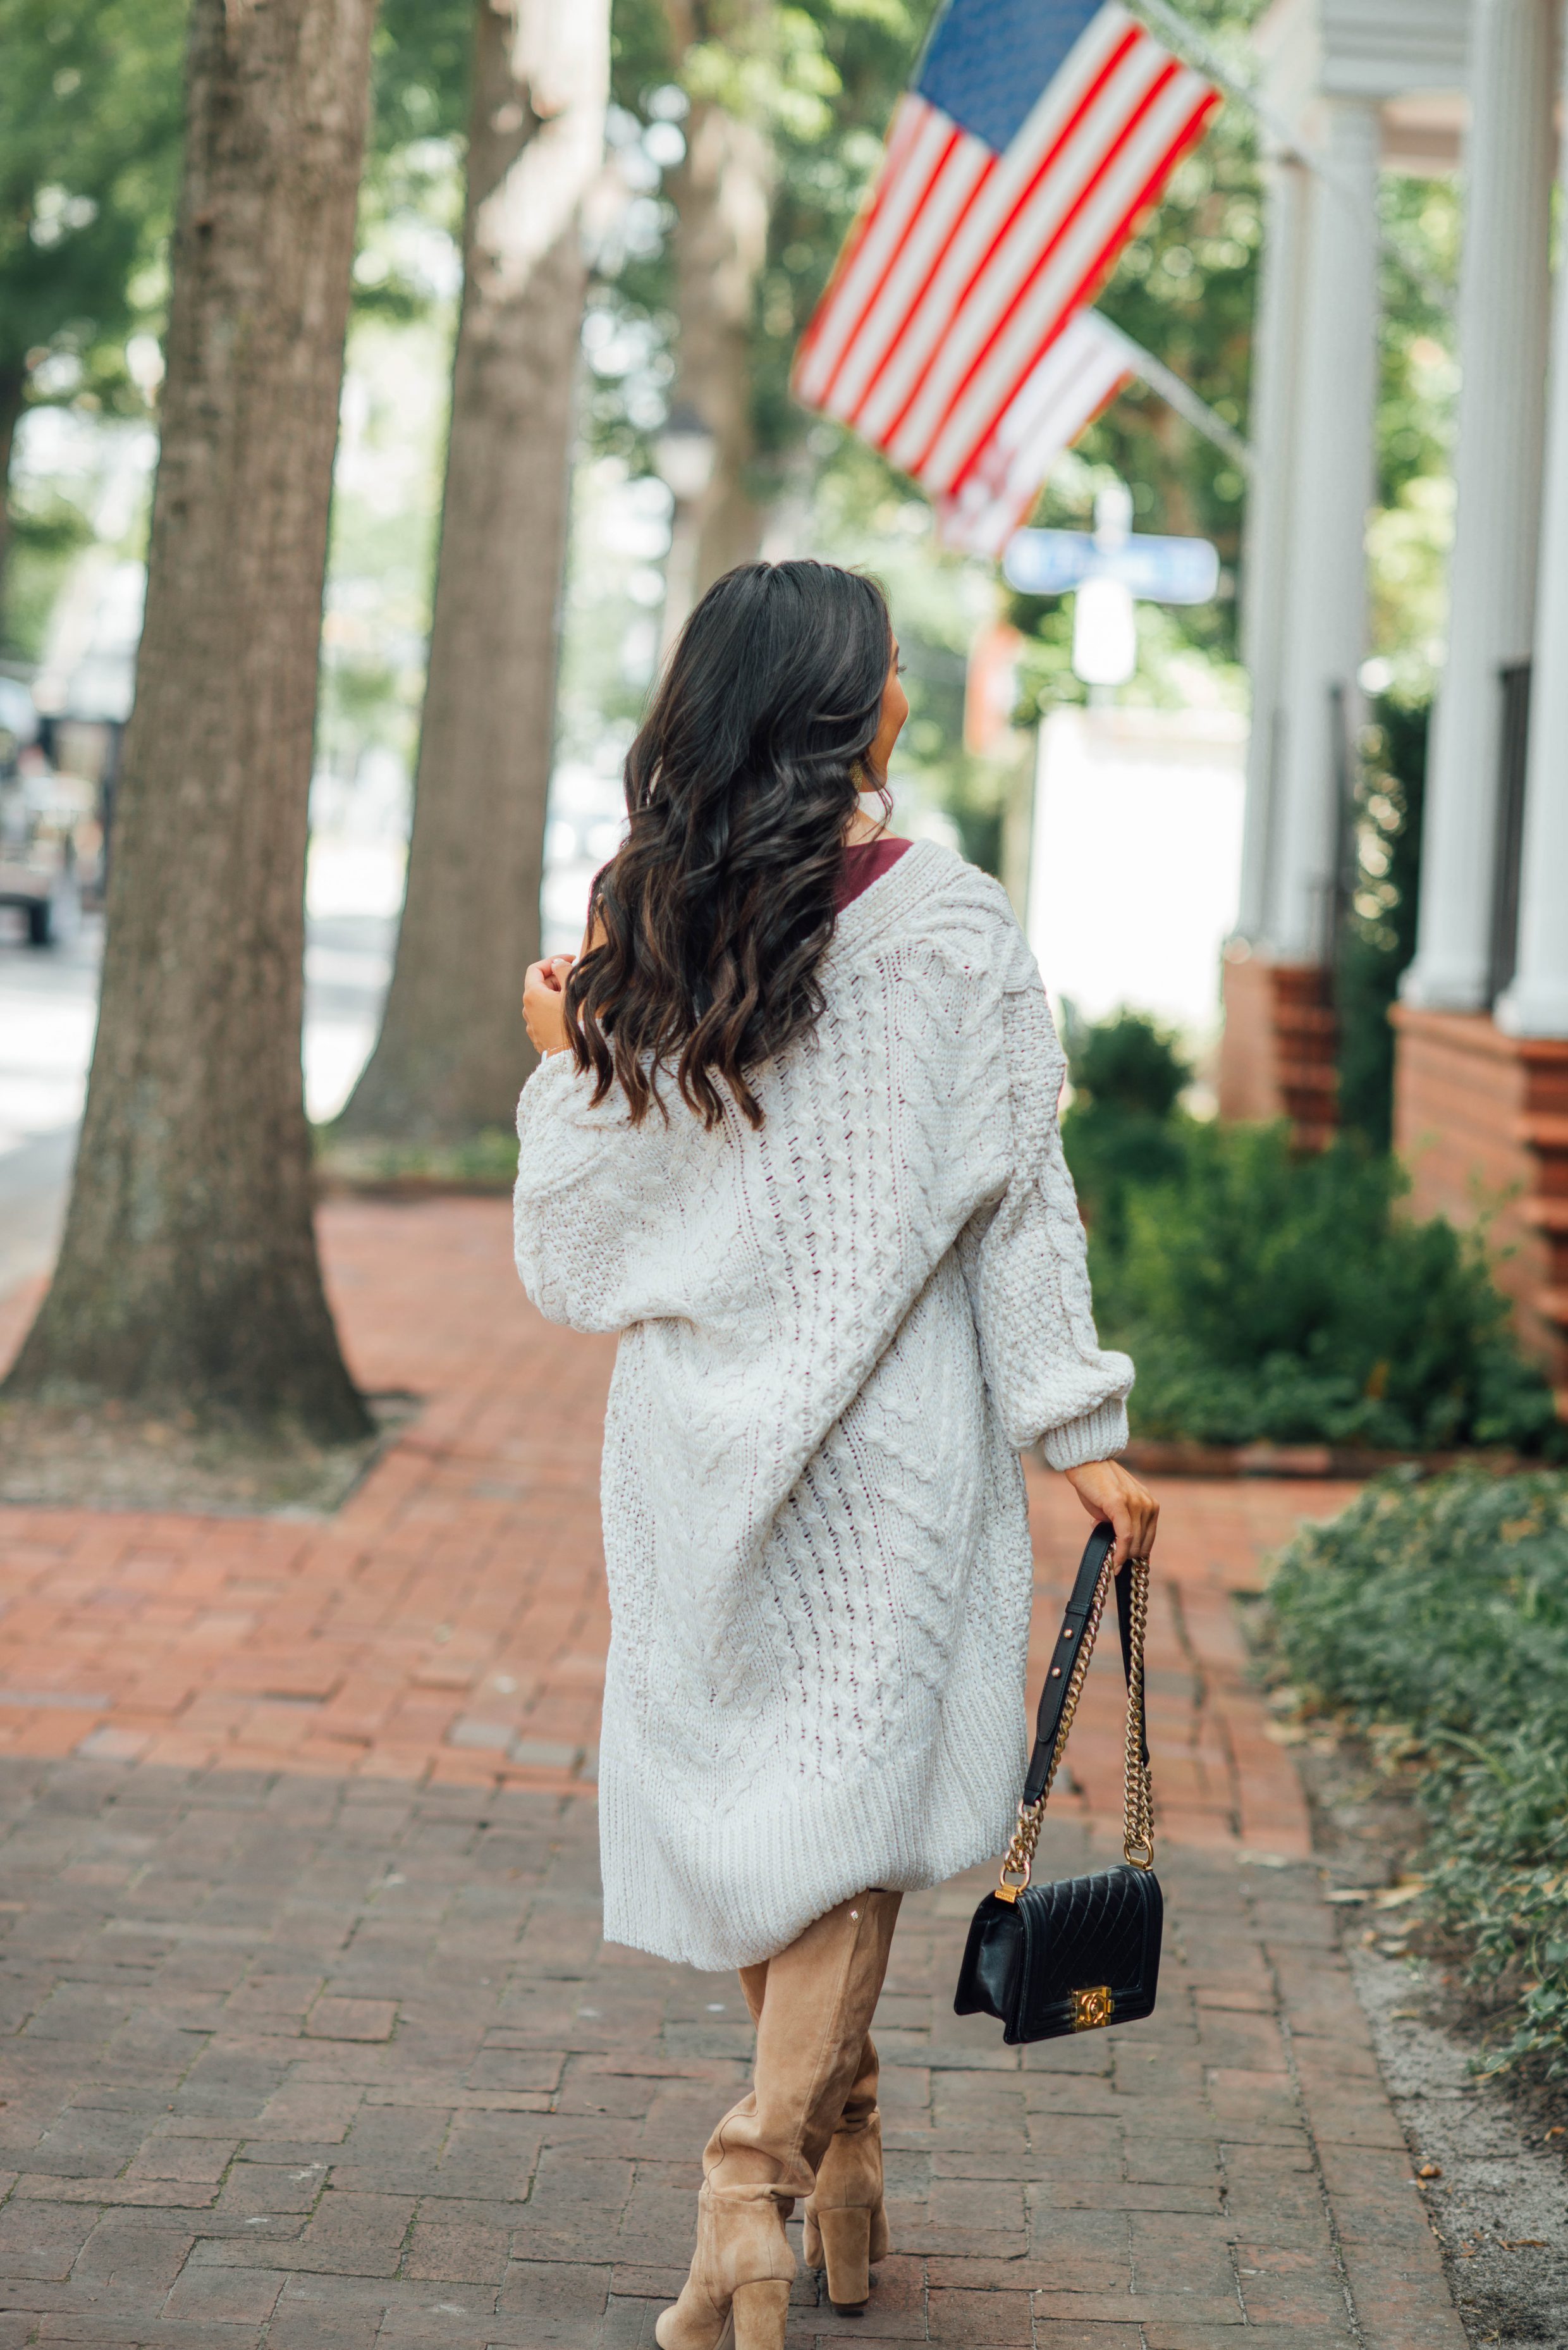 Topshop cream cardigan and knee high boots for fall outfit